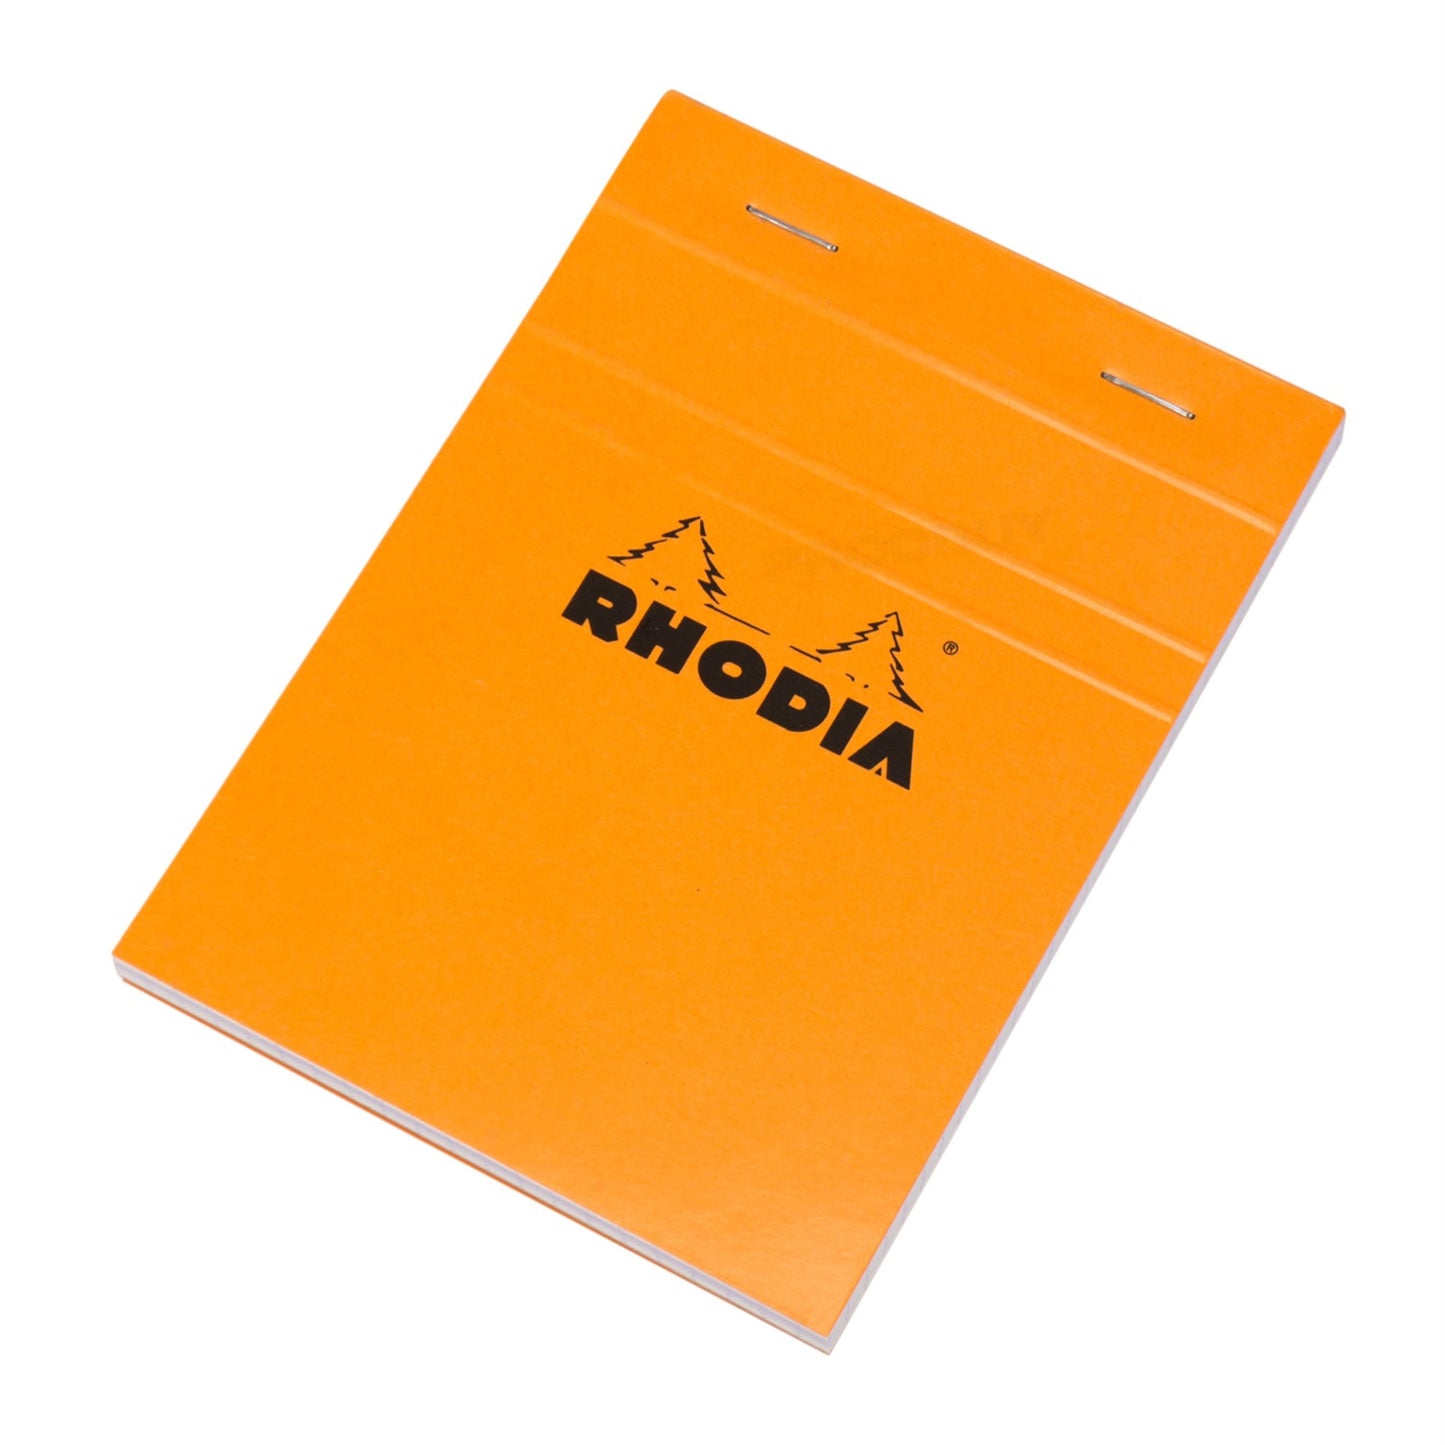 Set of 3 Rhodia A6 Notebooks with 5x5mm Square Grid Pages & Orange Covers